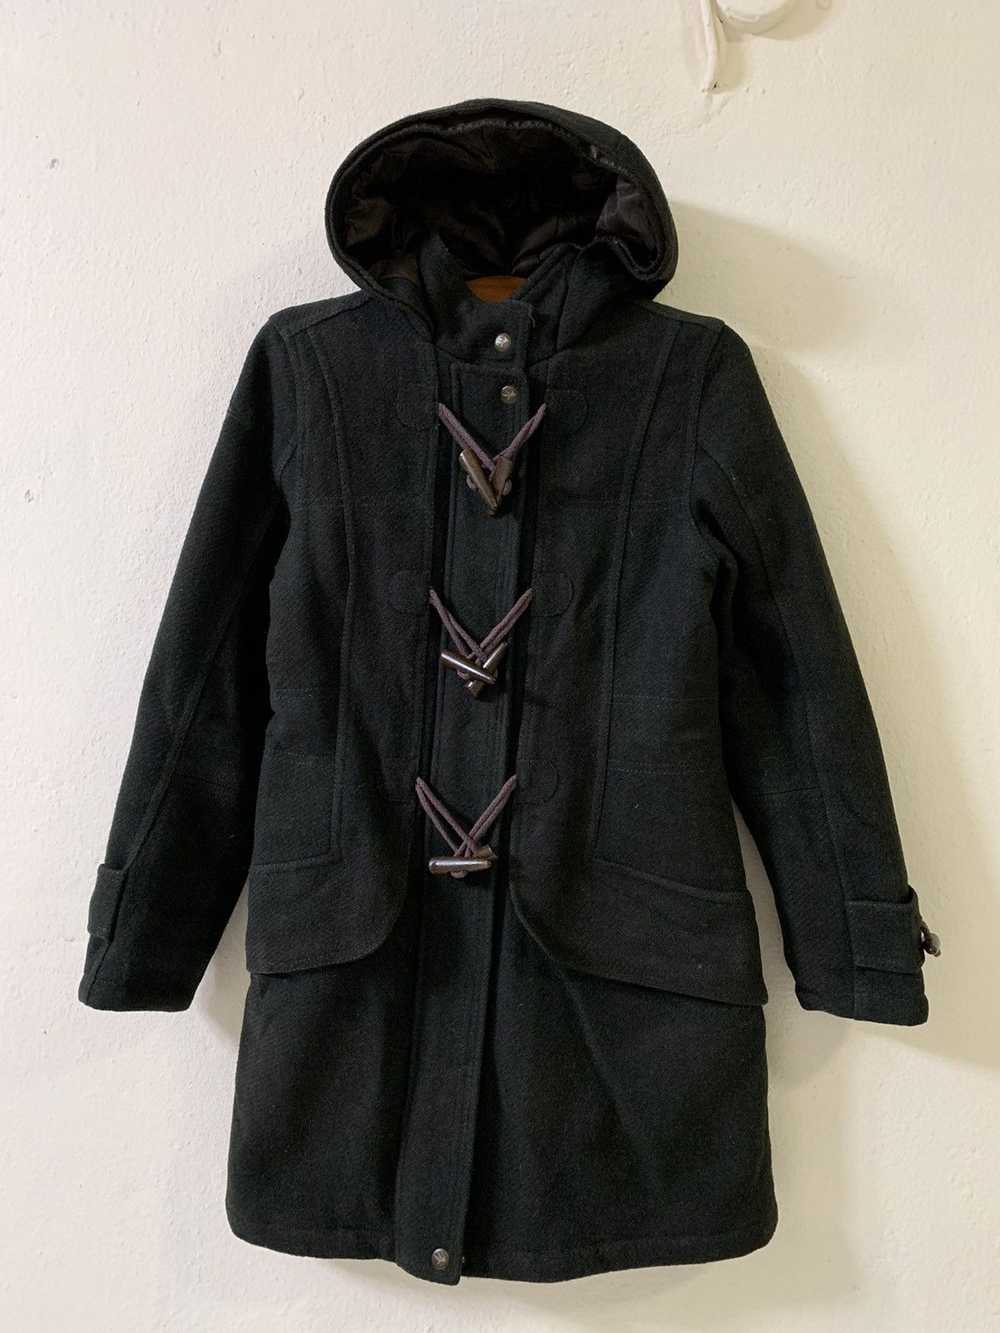 I. Spiewak And Sons I. Spiewak & Sons Hooded Coat - image 1